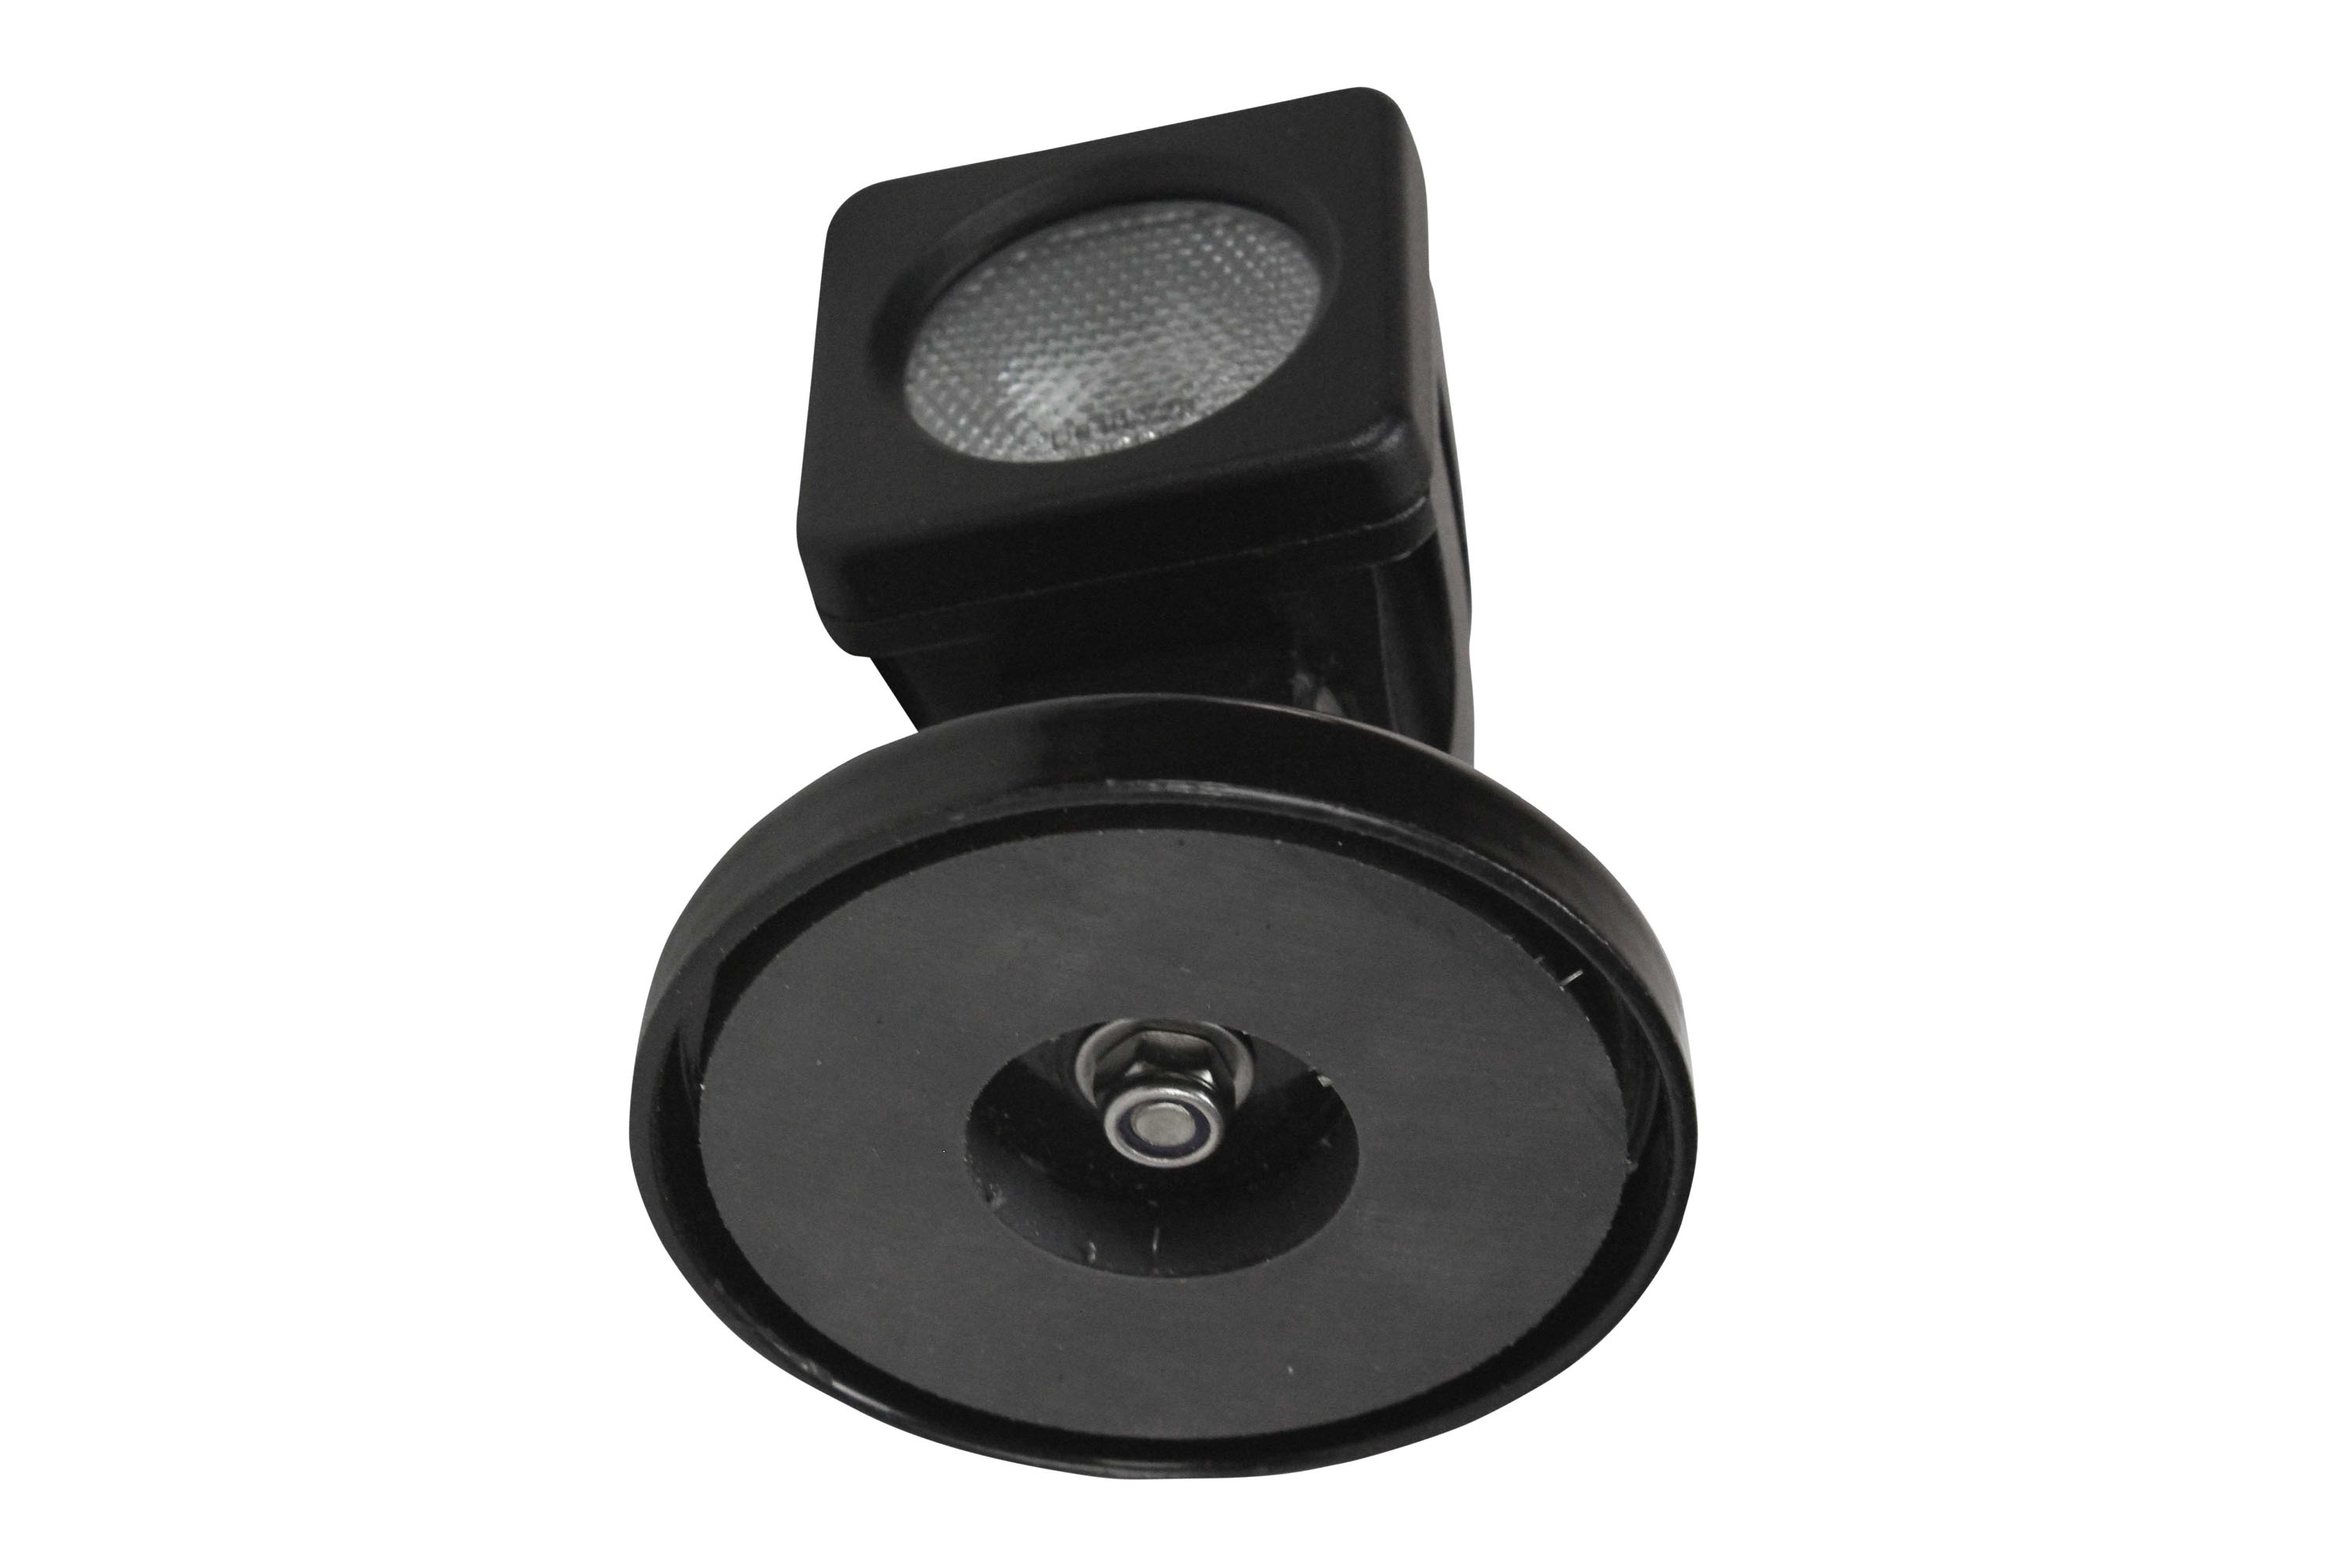 Infrared LED Strobe Light Equipped with an Inline Control Box